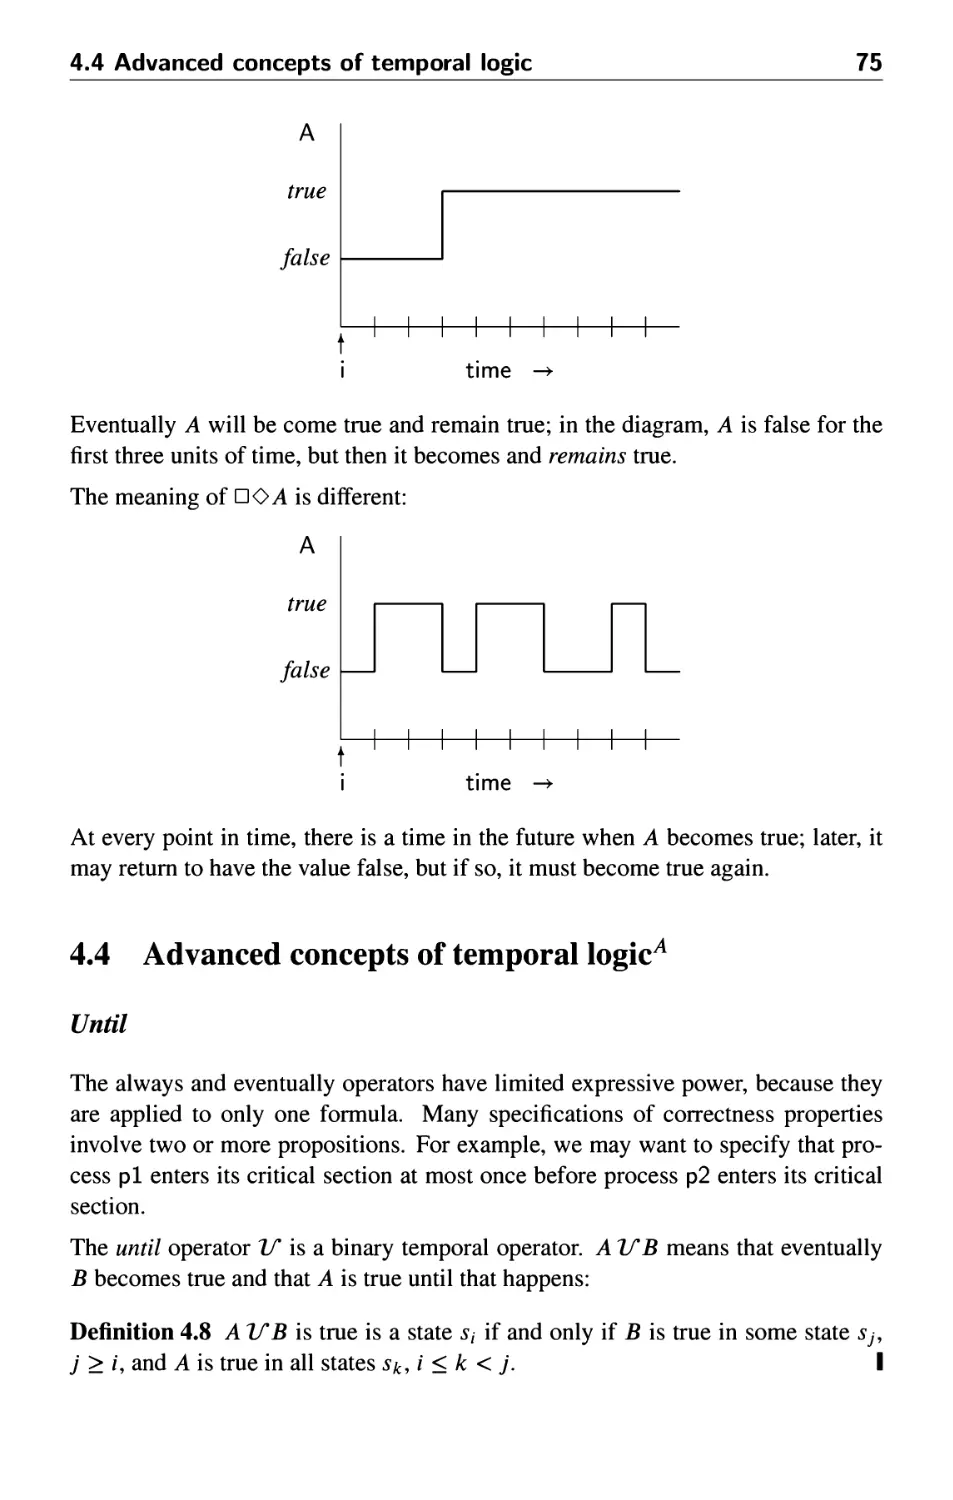 4.4 Advanced concepts of temporal logic